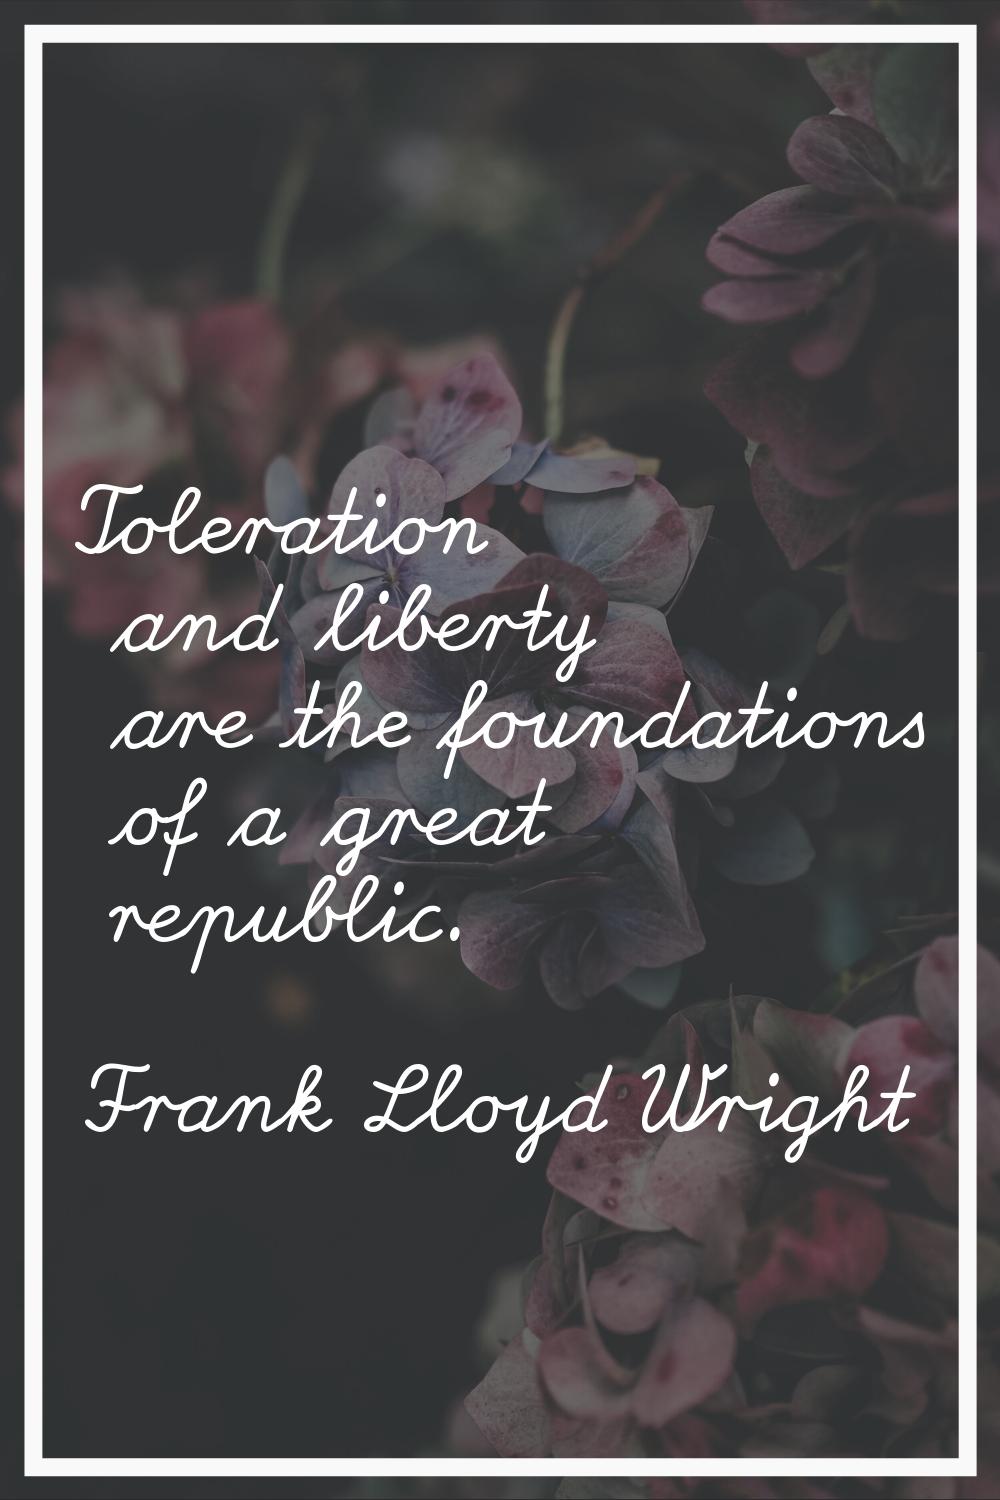 Toleration and liberty are the foundations of a great republic.